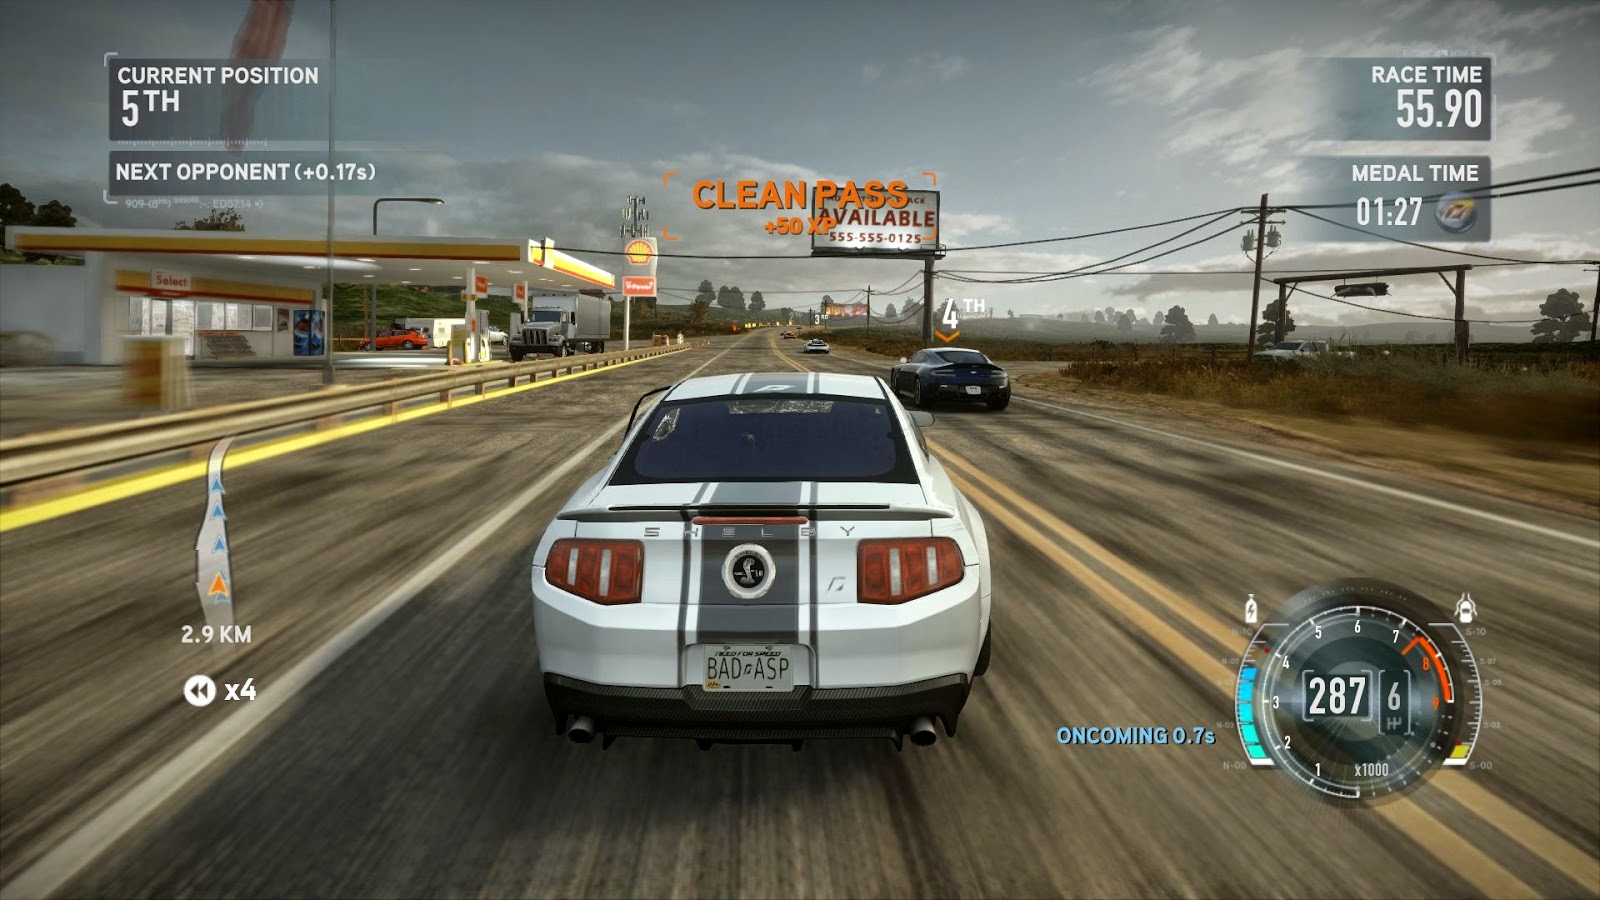 Need For Speed The Run Mac Download